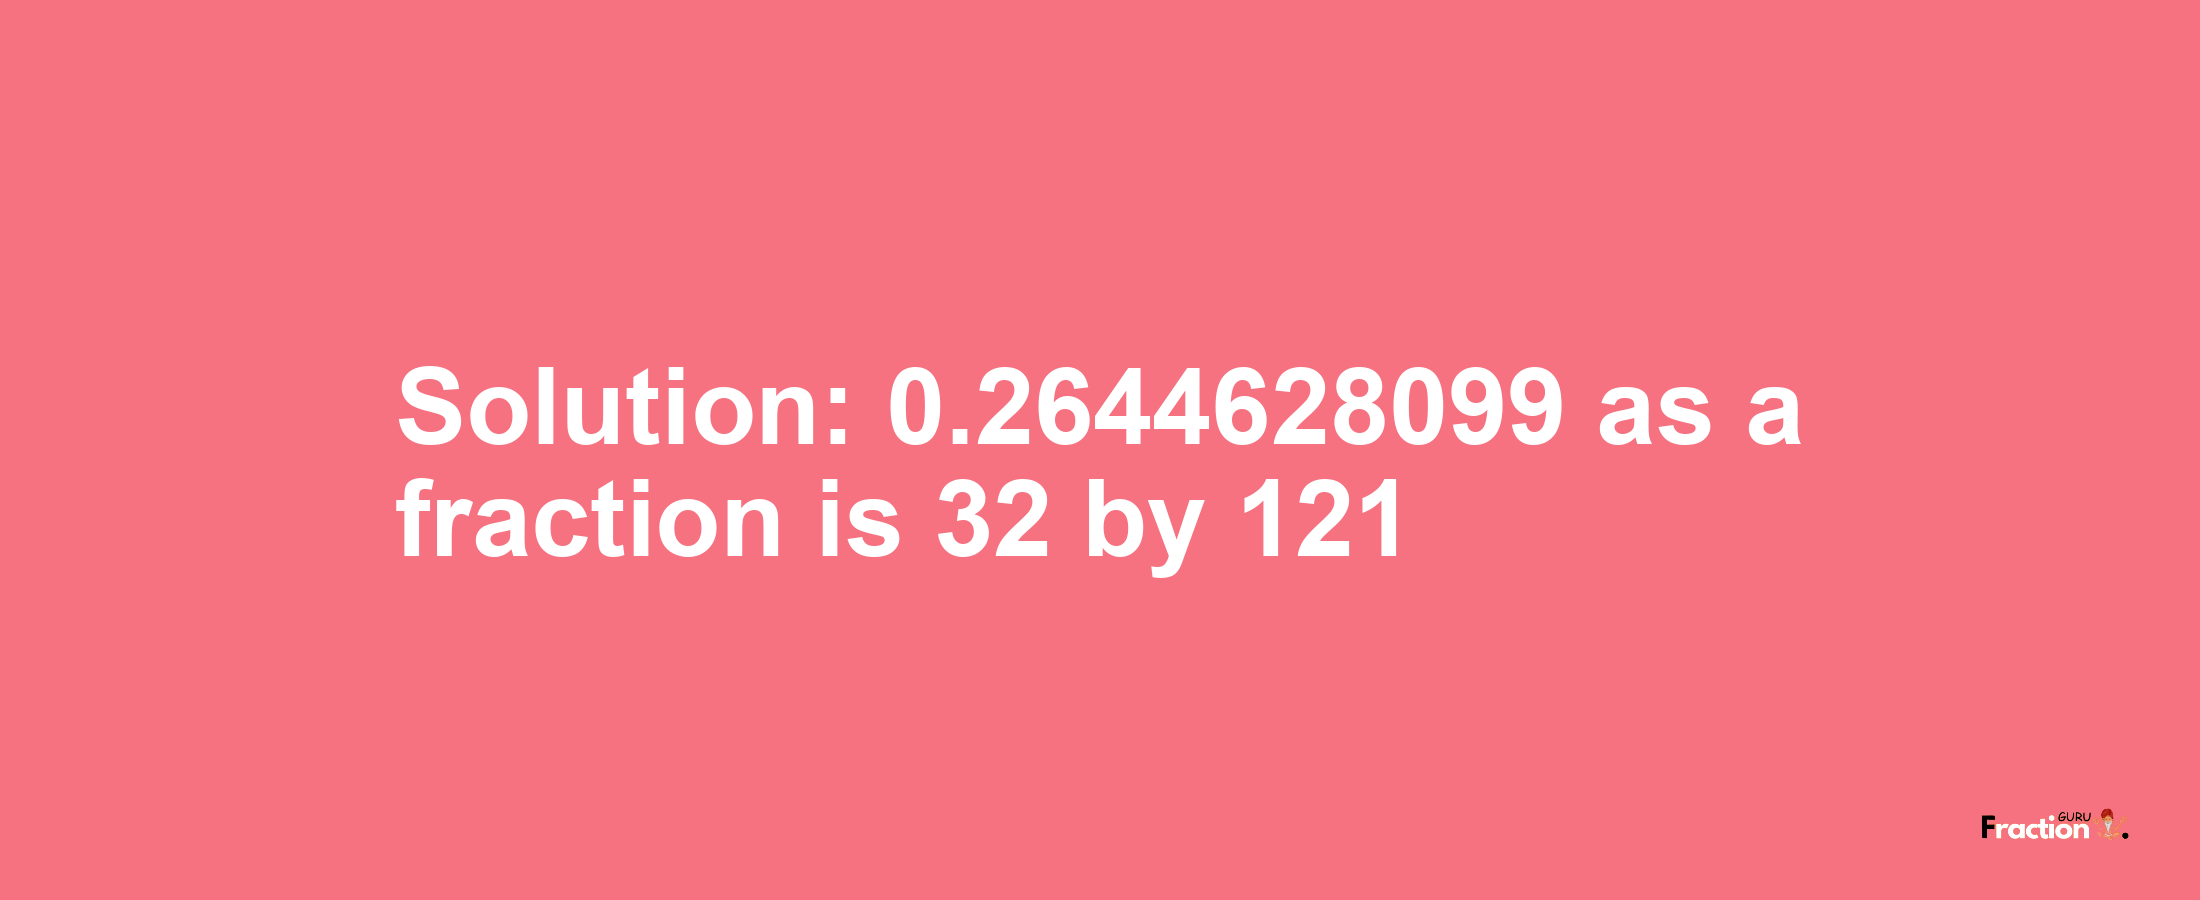 Solution:0.2644628099 as a fraction is 32/121